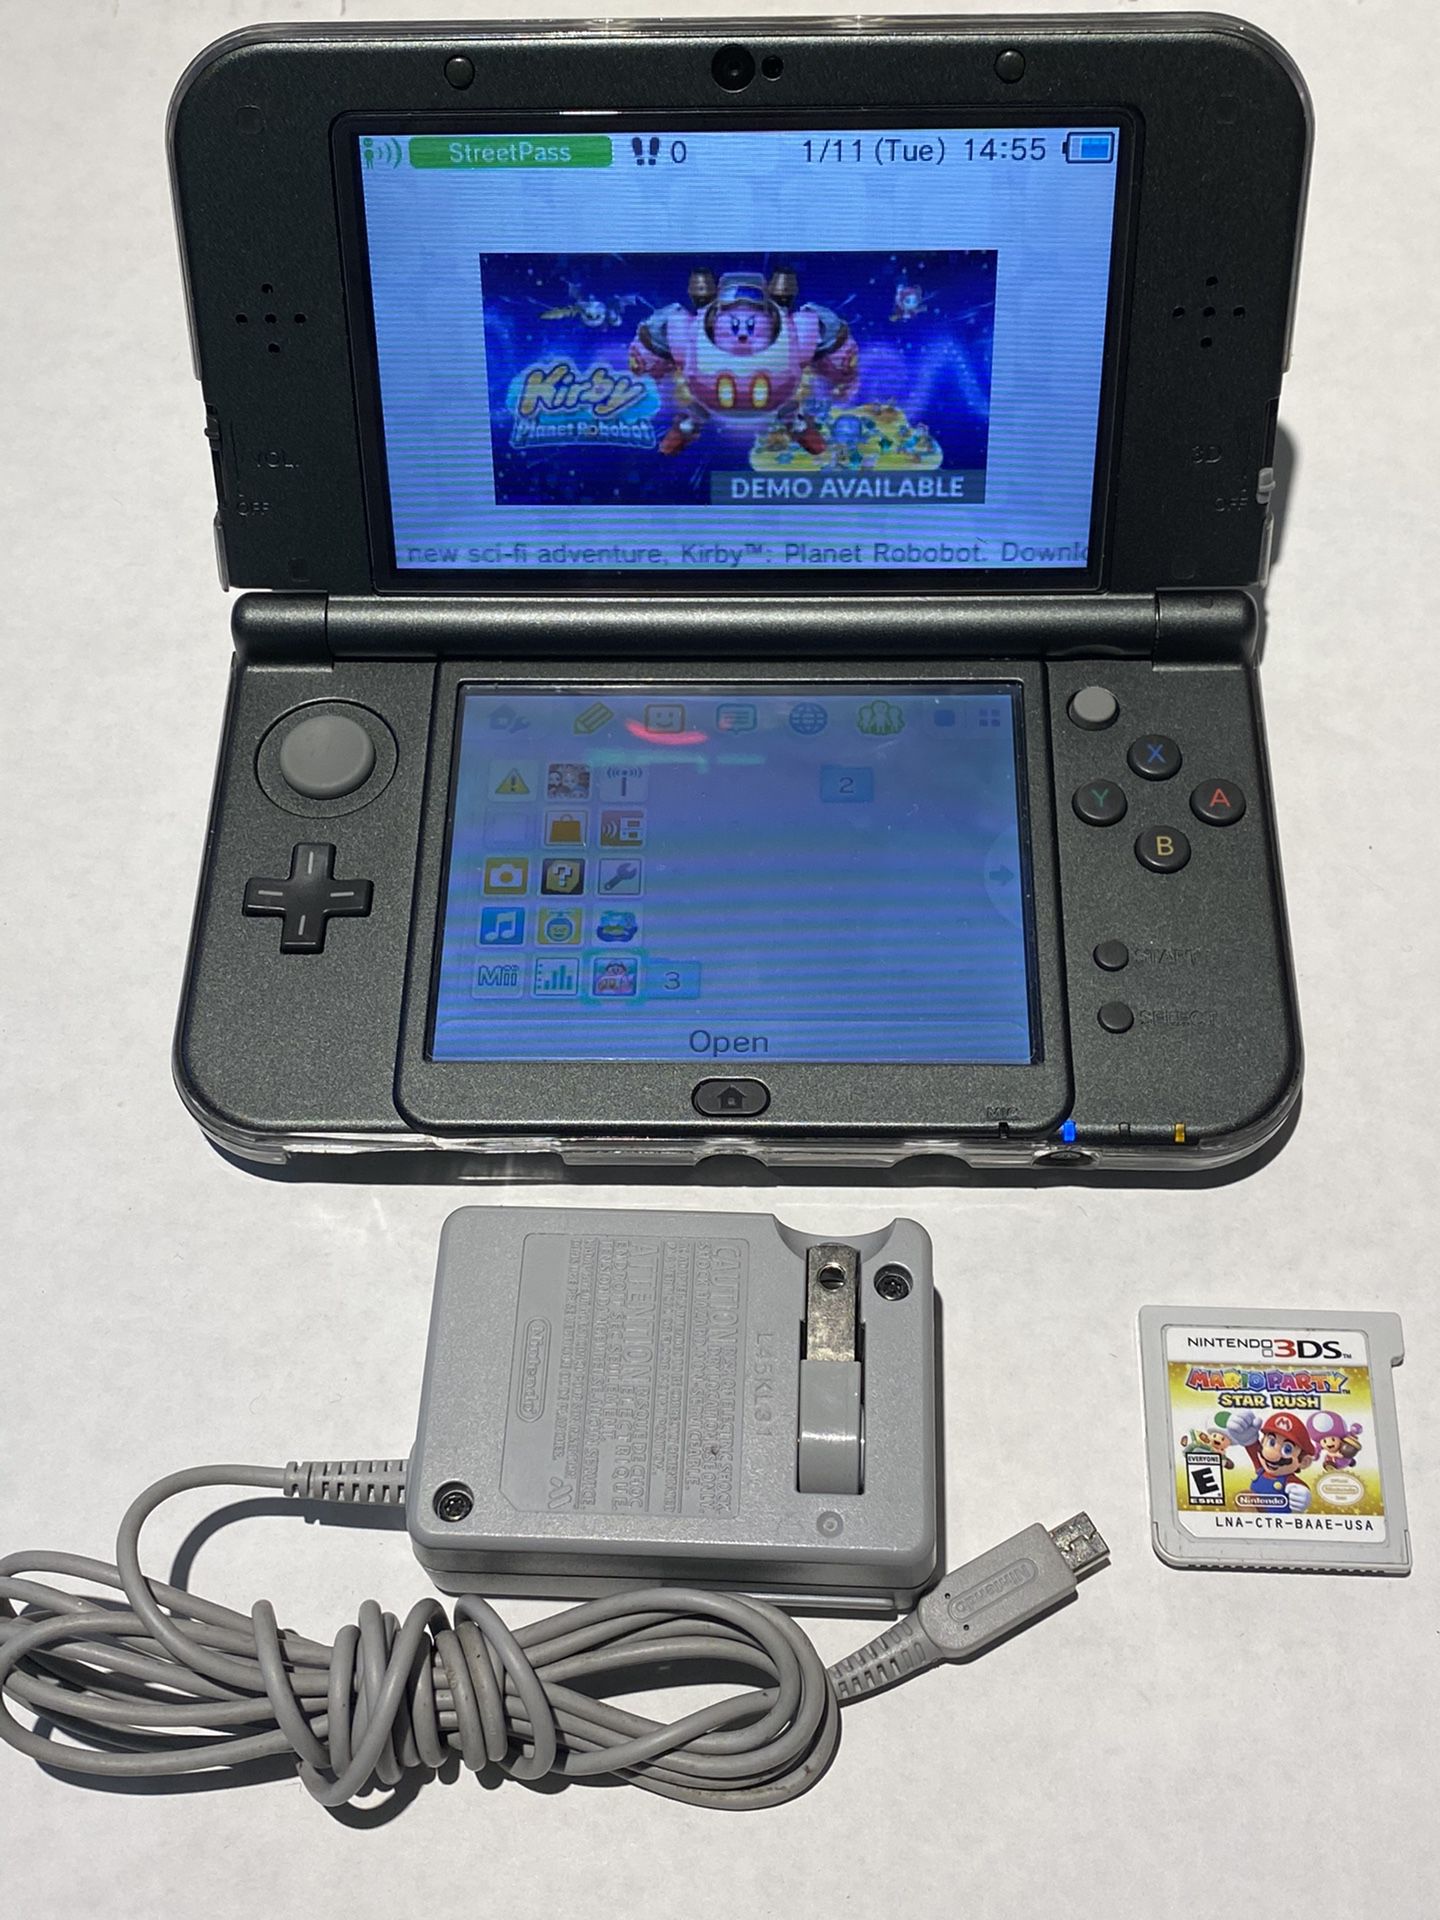 Nintendo 3DS XL with Protective Case, Charger and Mario Party Game